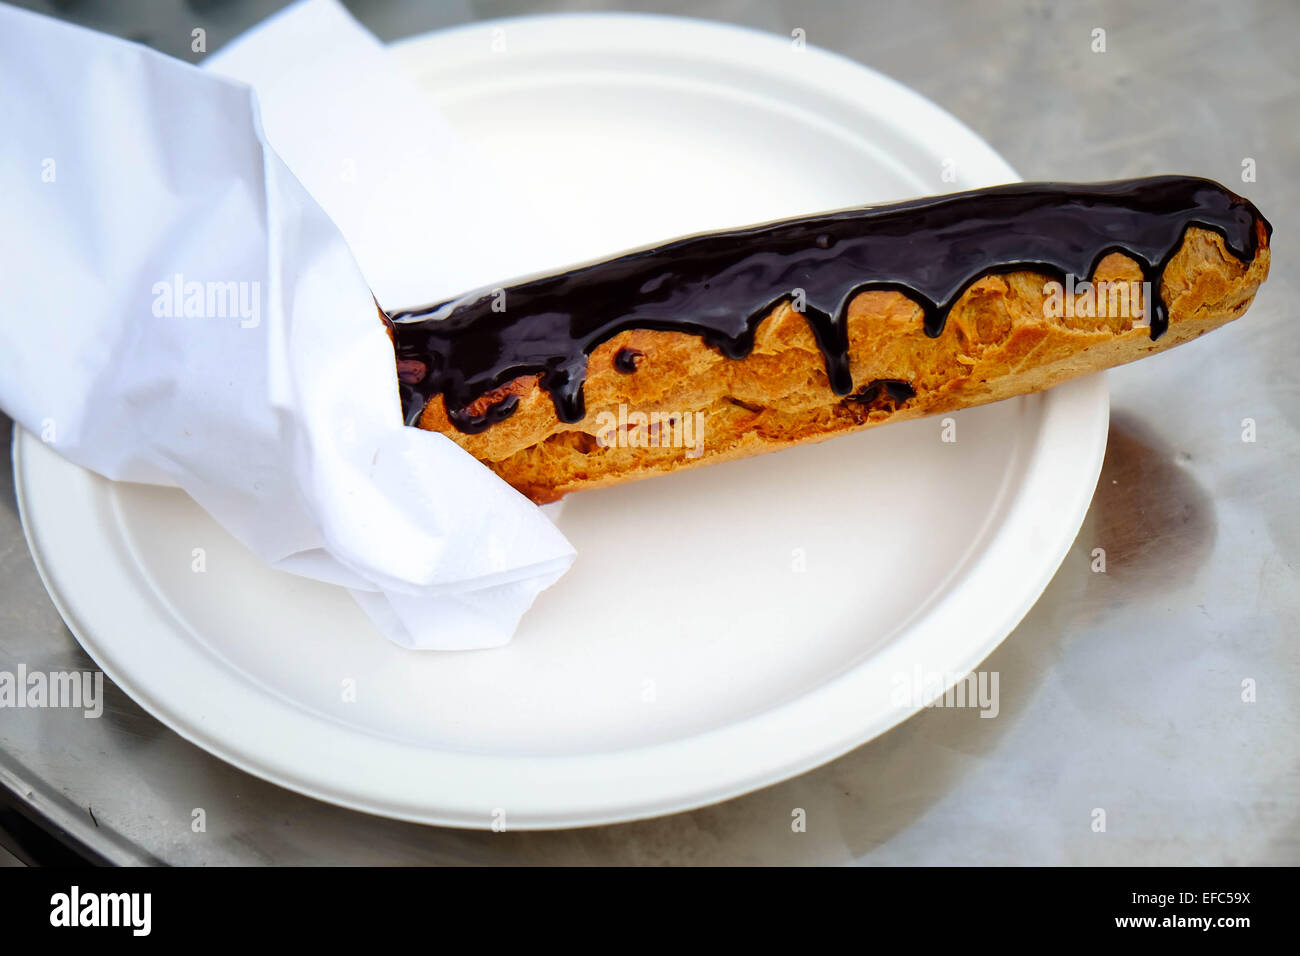 A single chocolate eclair on a white plate Stock Photo